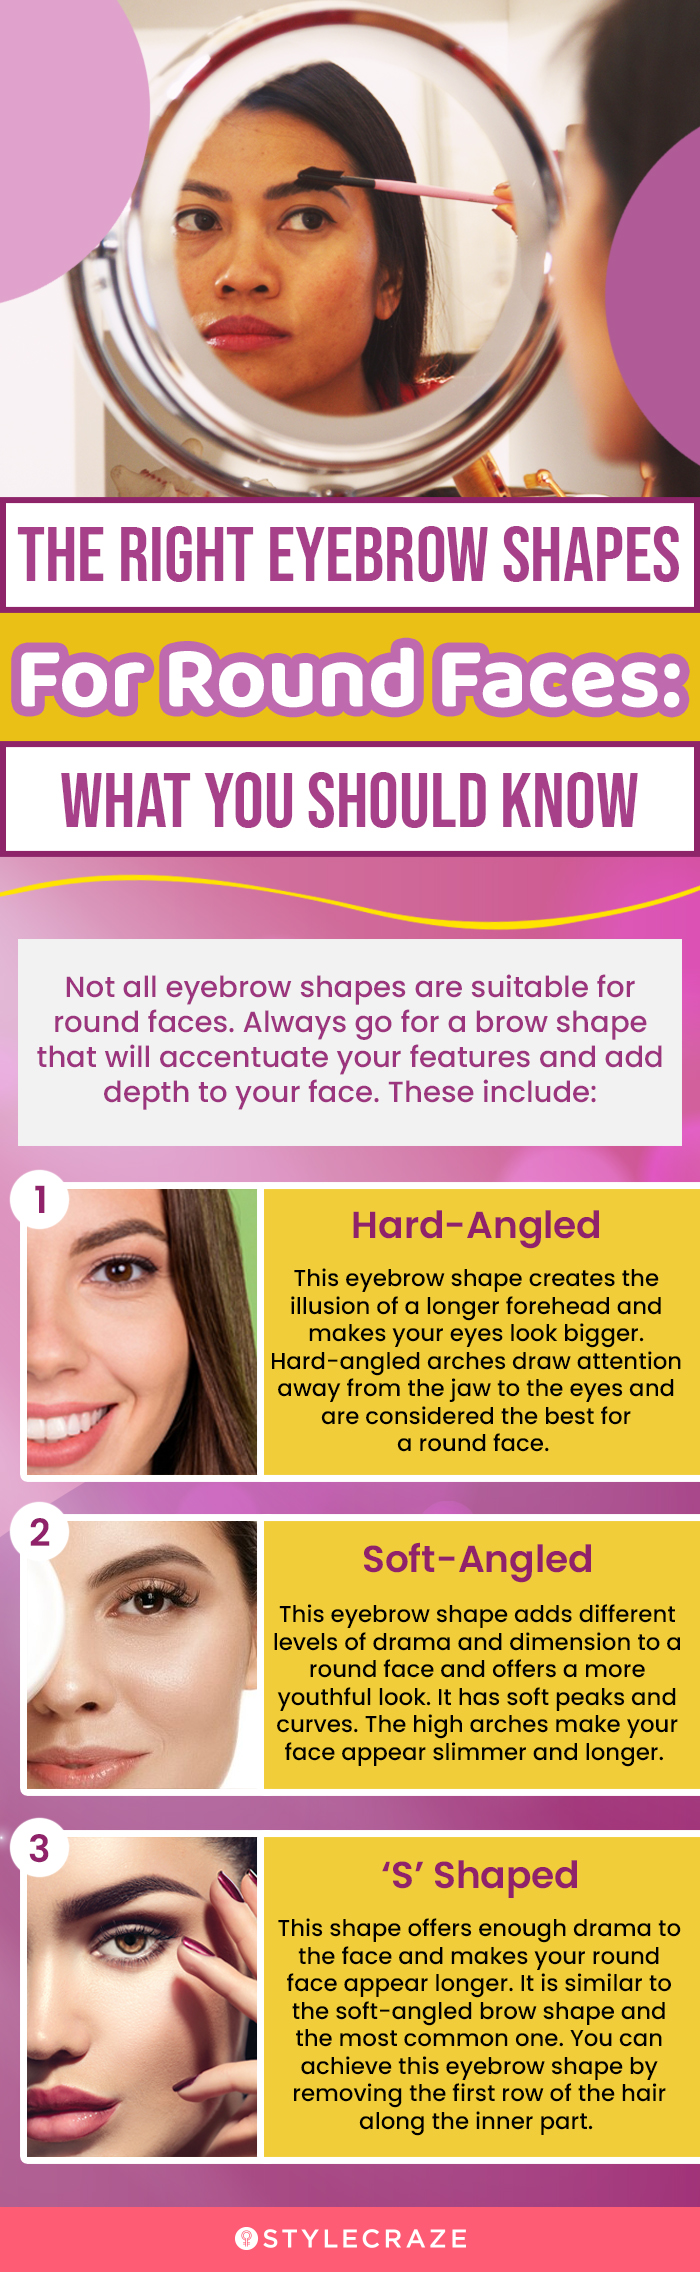 the right eyebrow shapes for round face you should know about (infographic)